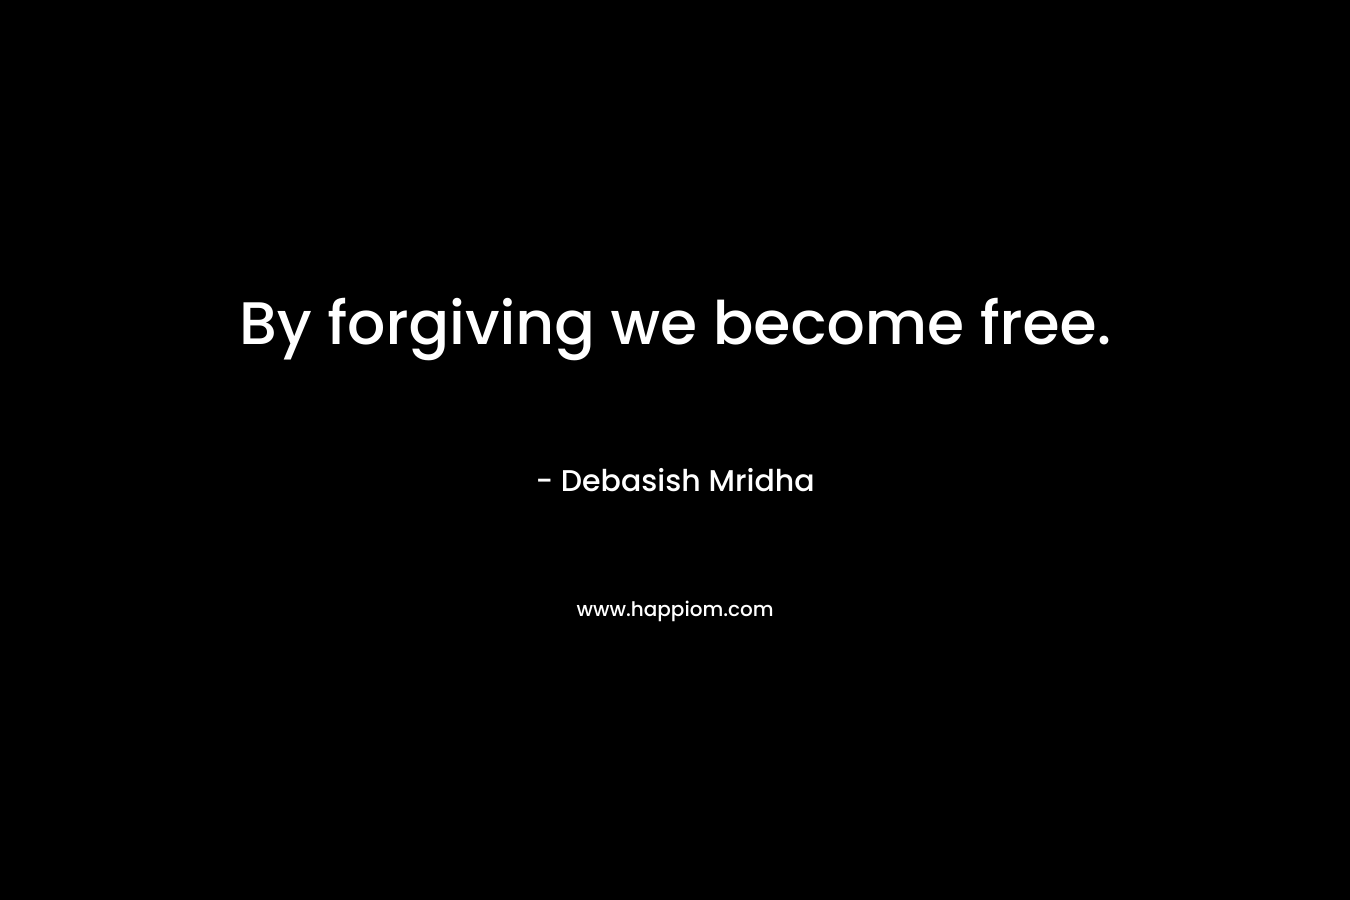 By forgiving we become free.